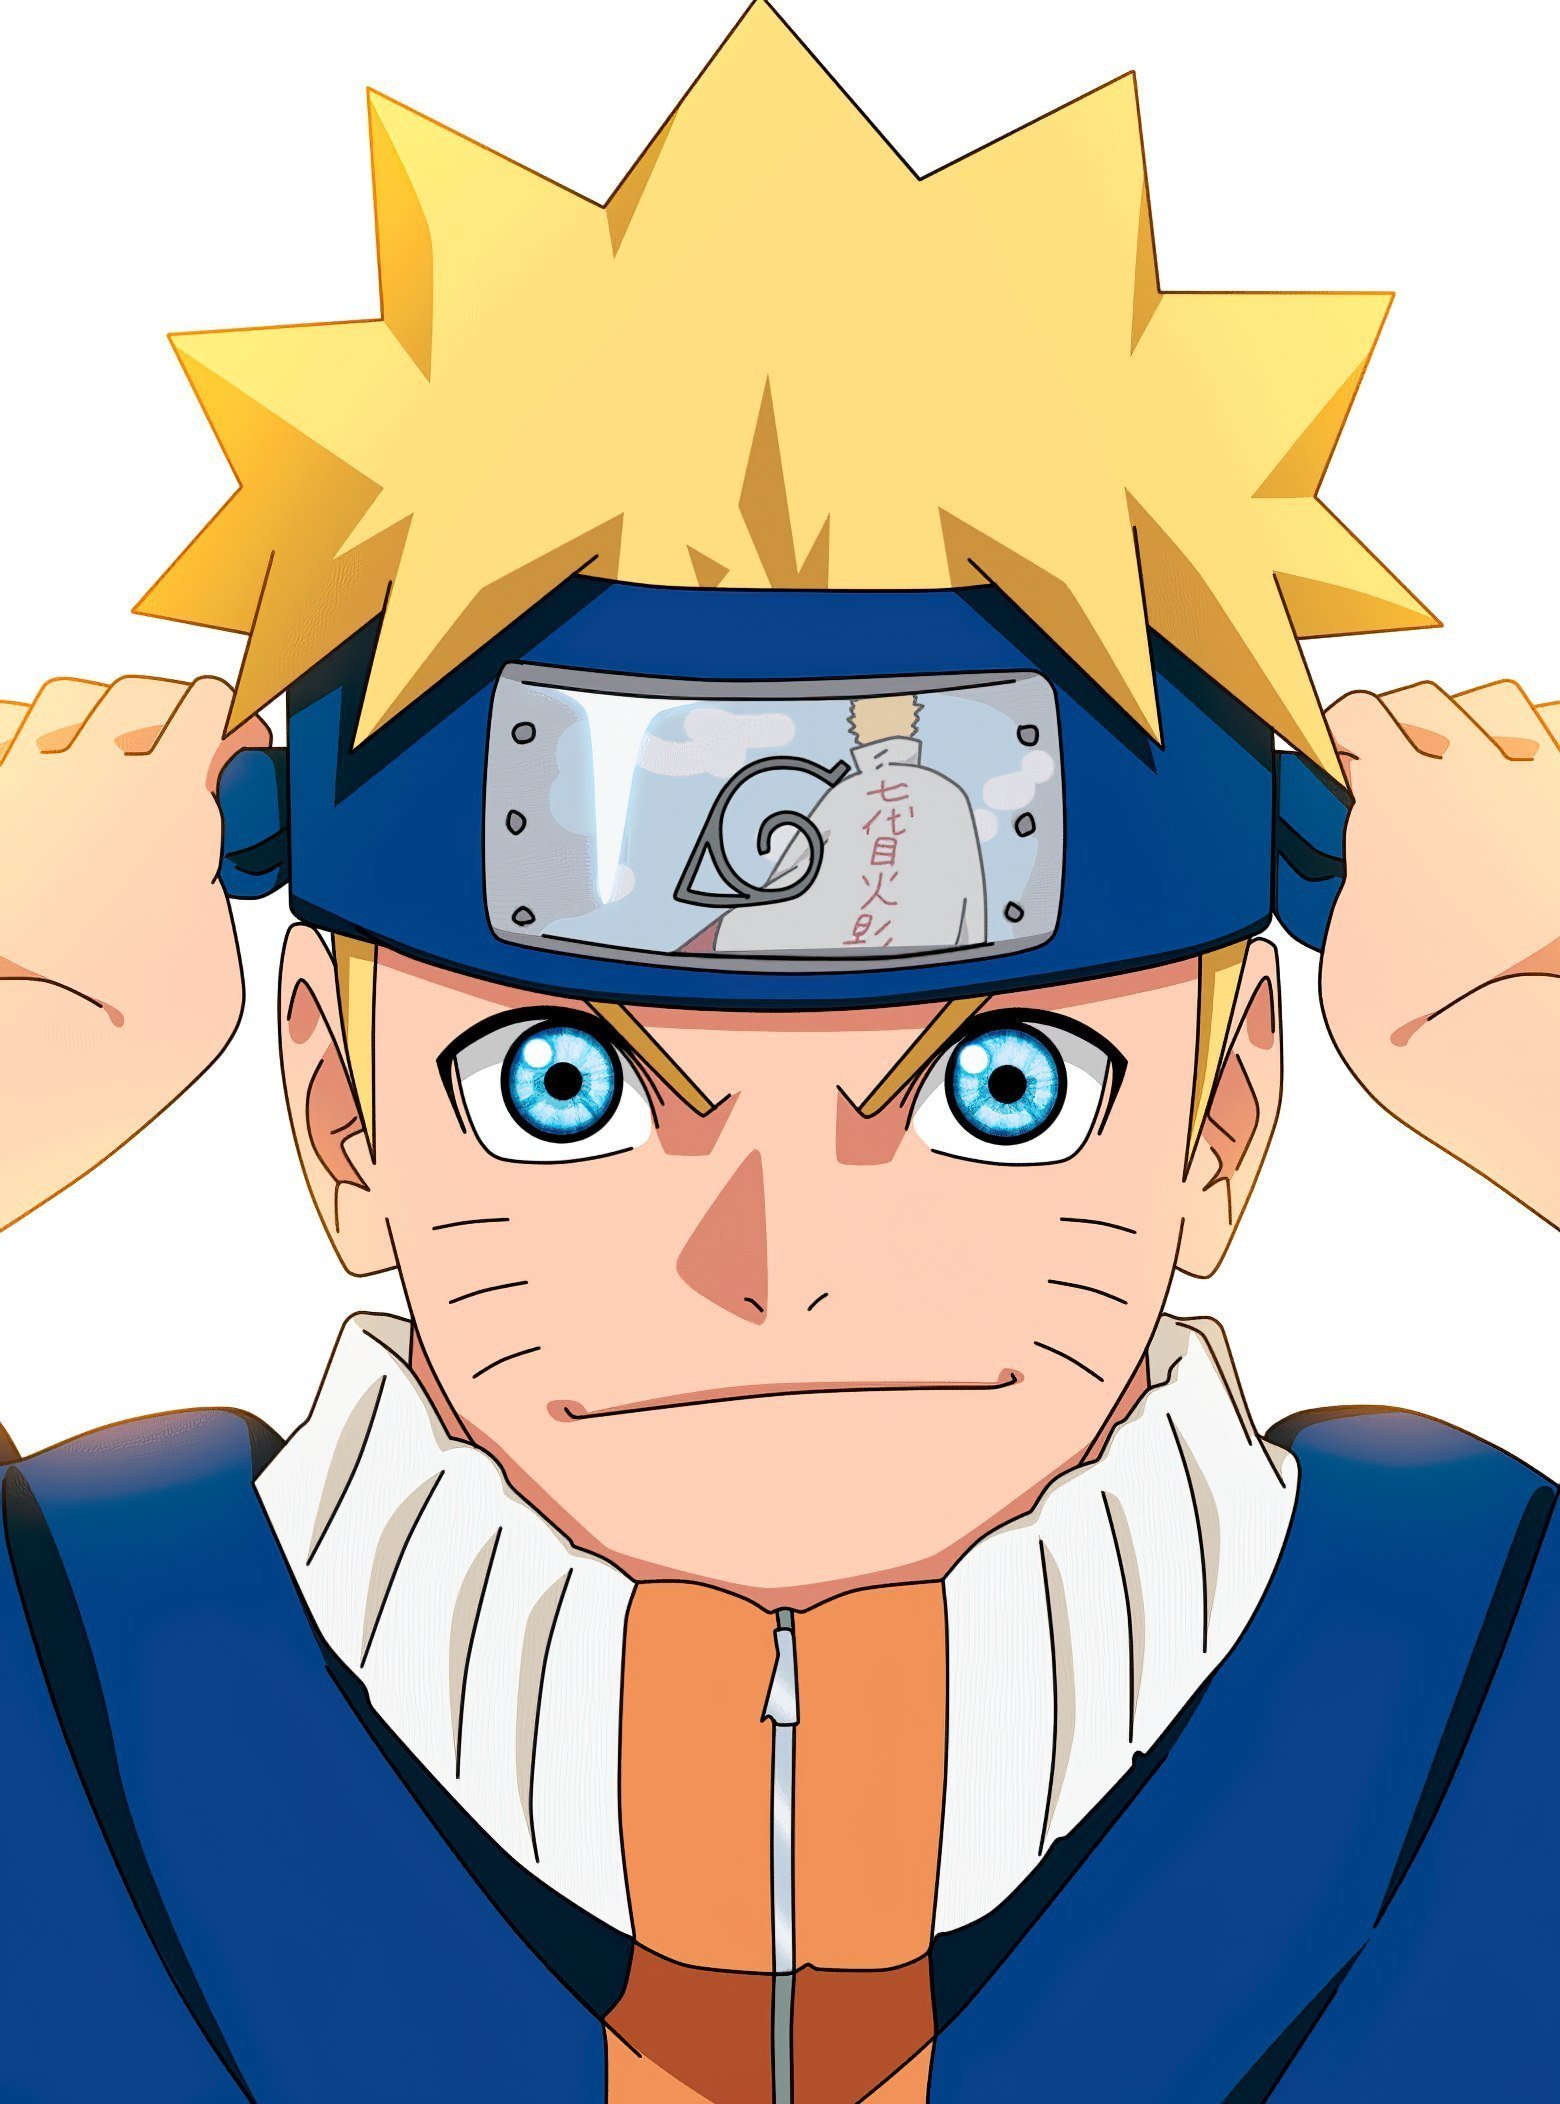 Naruto's New 20th Anniversary Anime Episodes Delayed; Here's Why